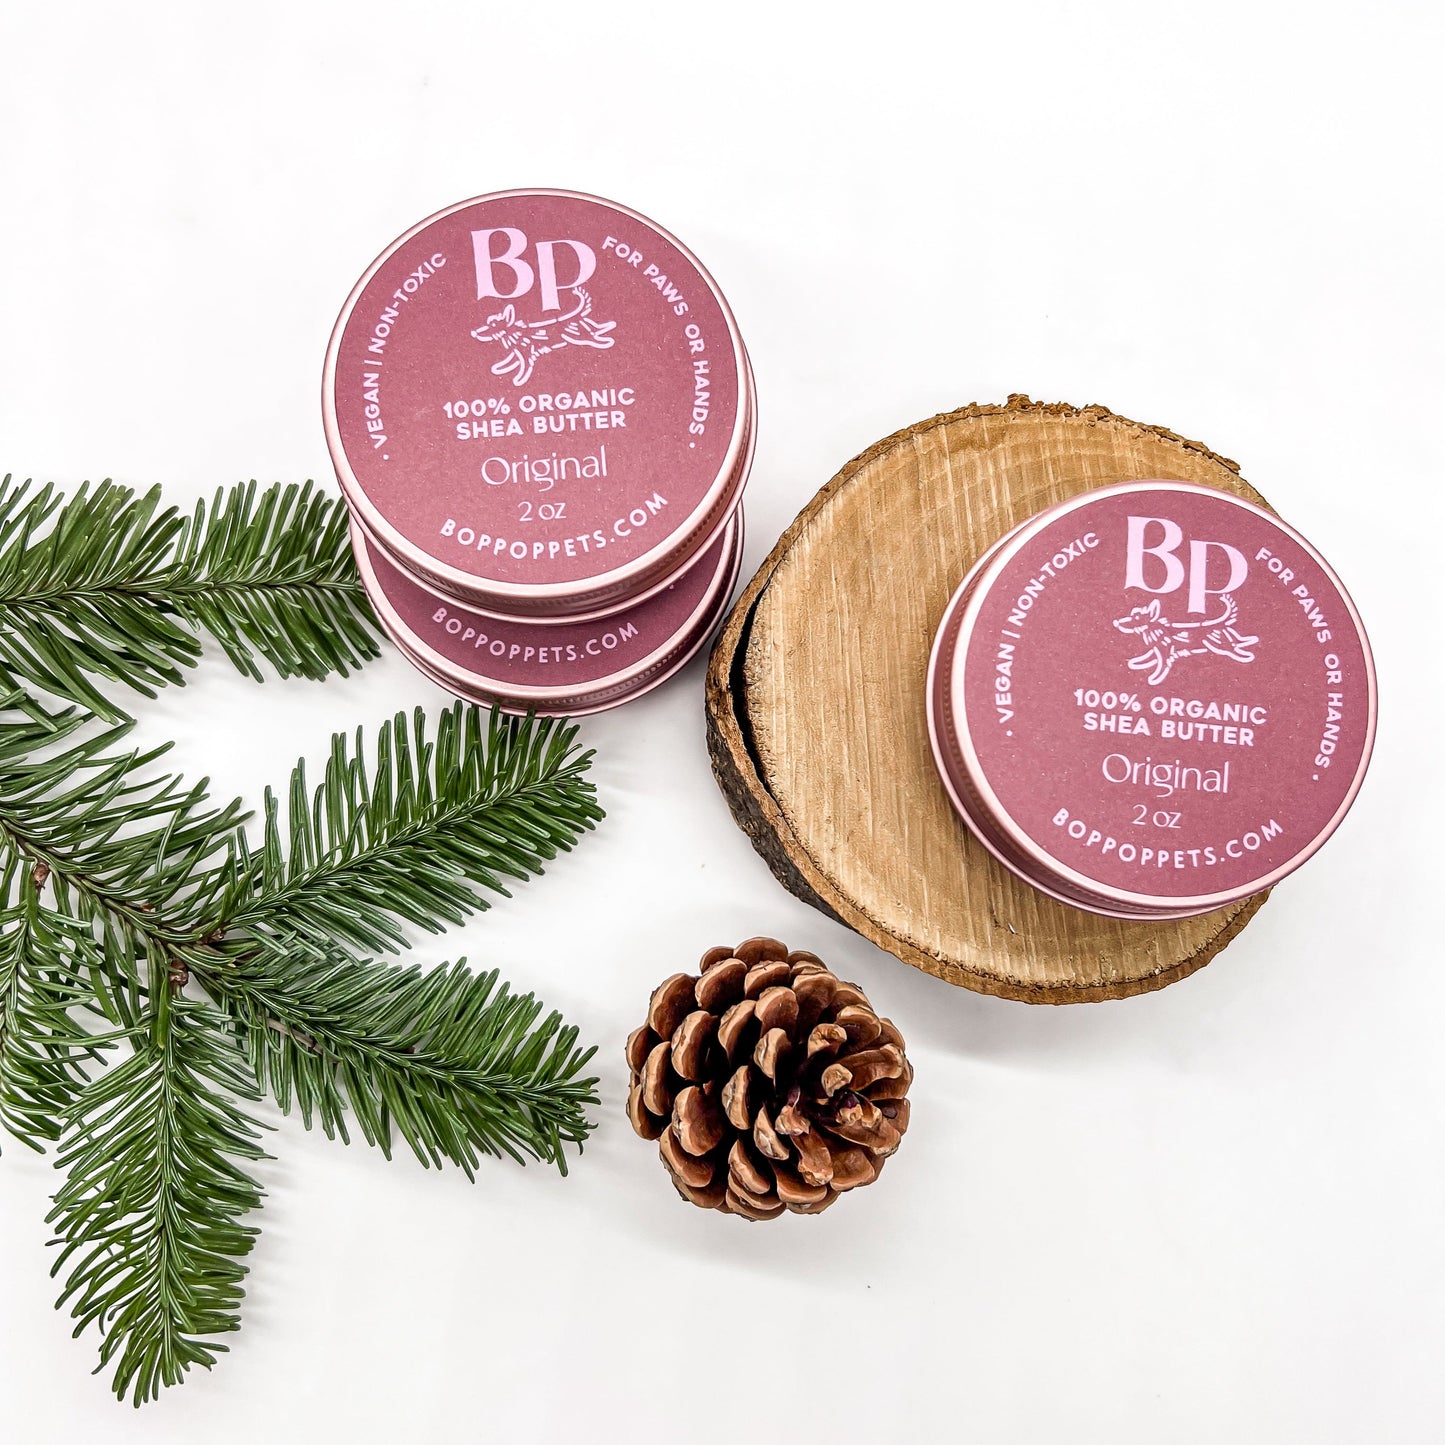 Shea butter  paw balm bop pop pets tin for dry cracked dog paws winter hands pet accessories 2 oz non-toxic vegan organic